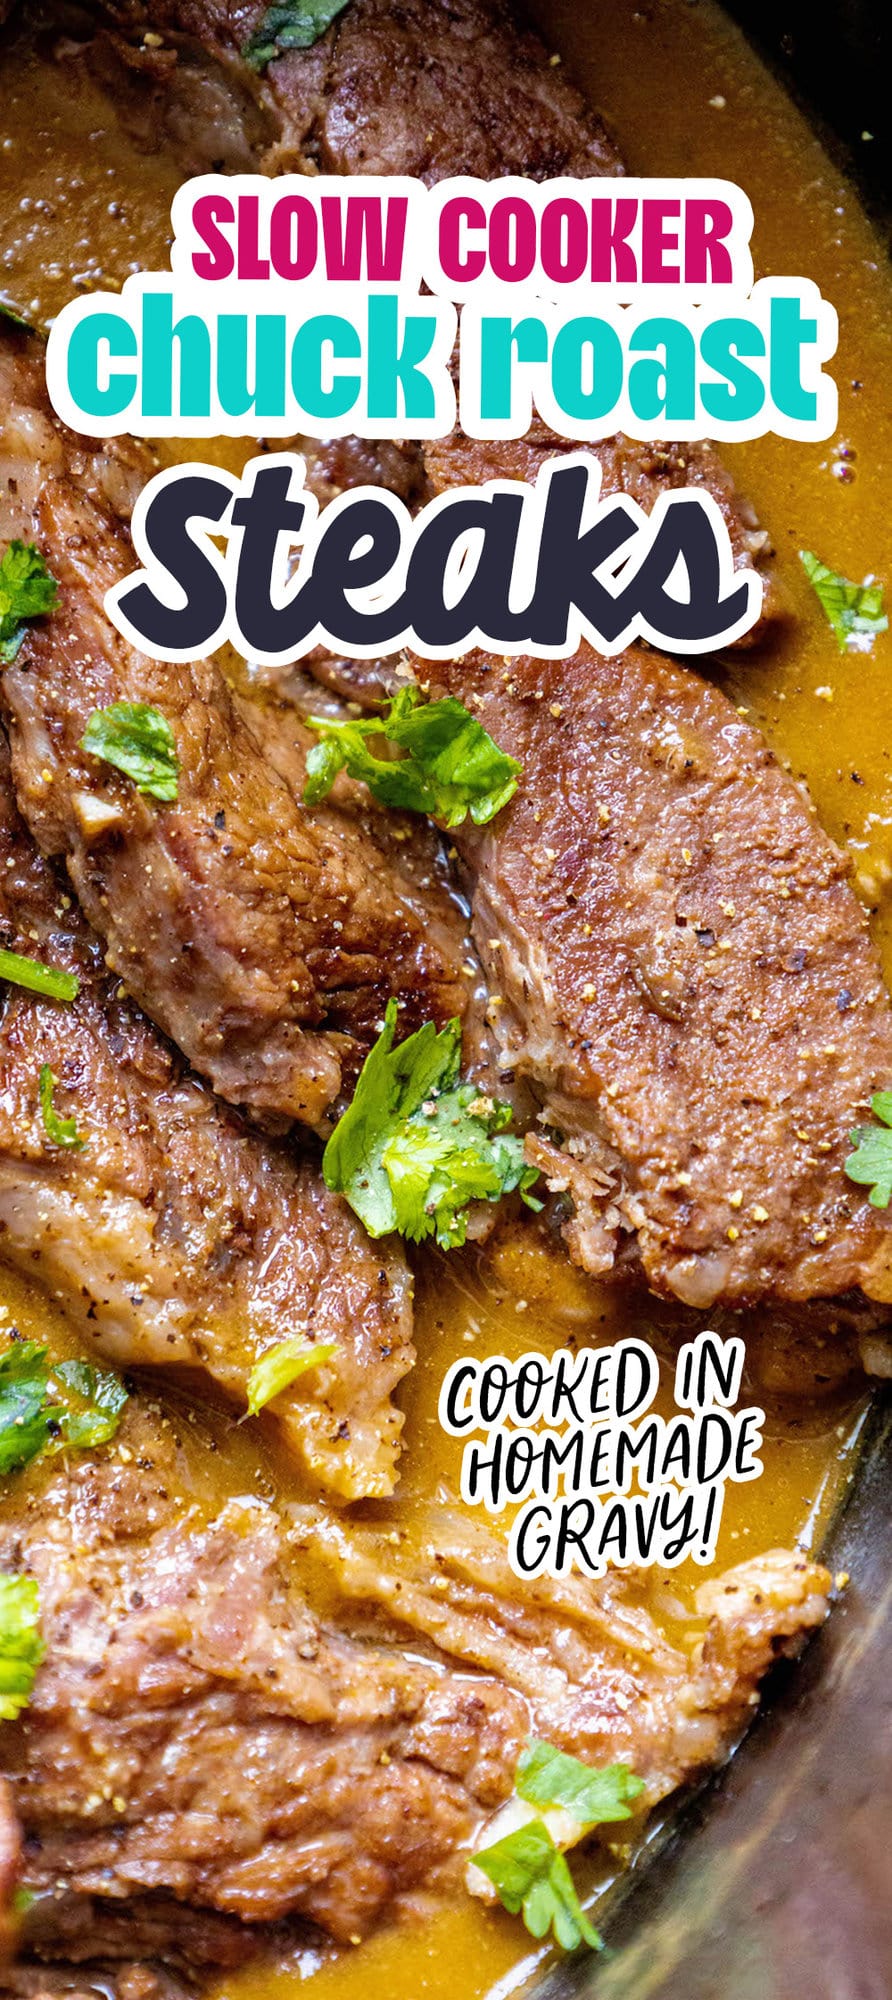 chuck roast steaks with gravy and parsley in a slow cooker